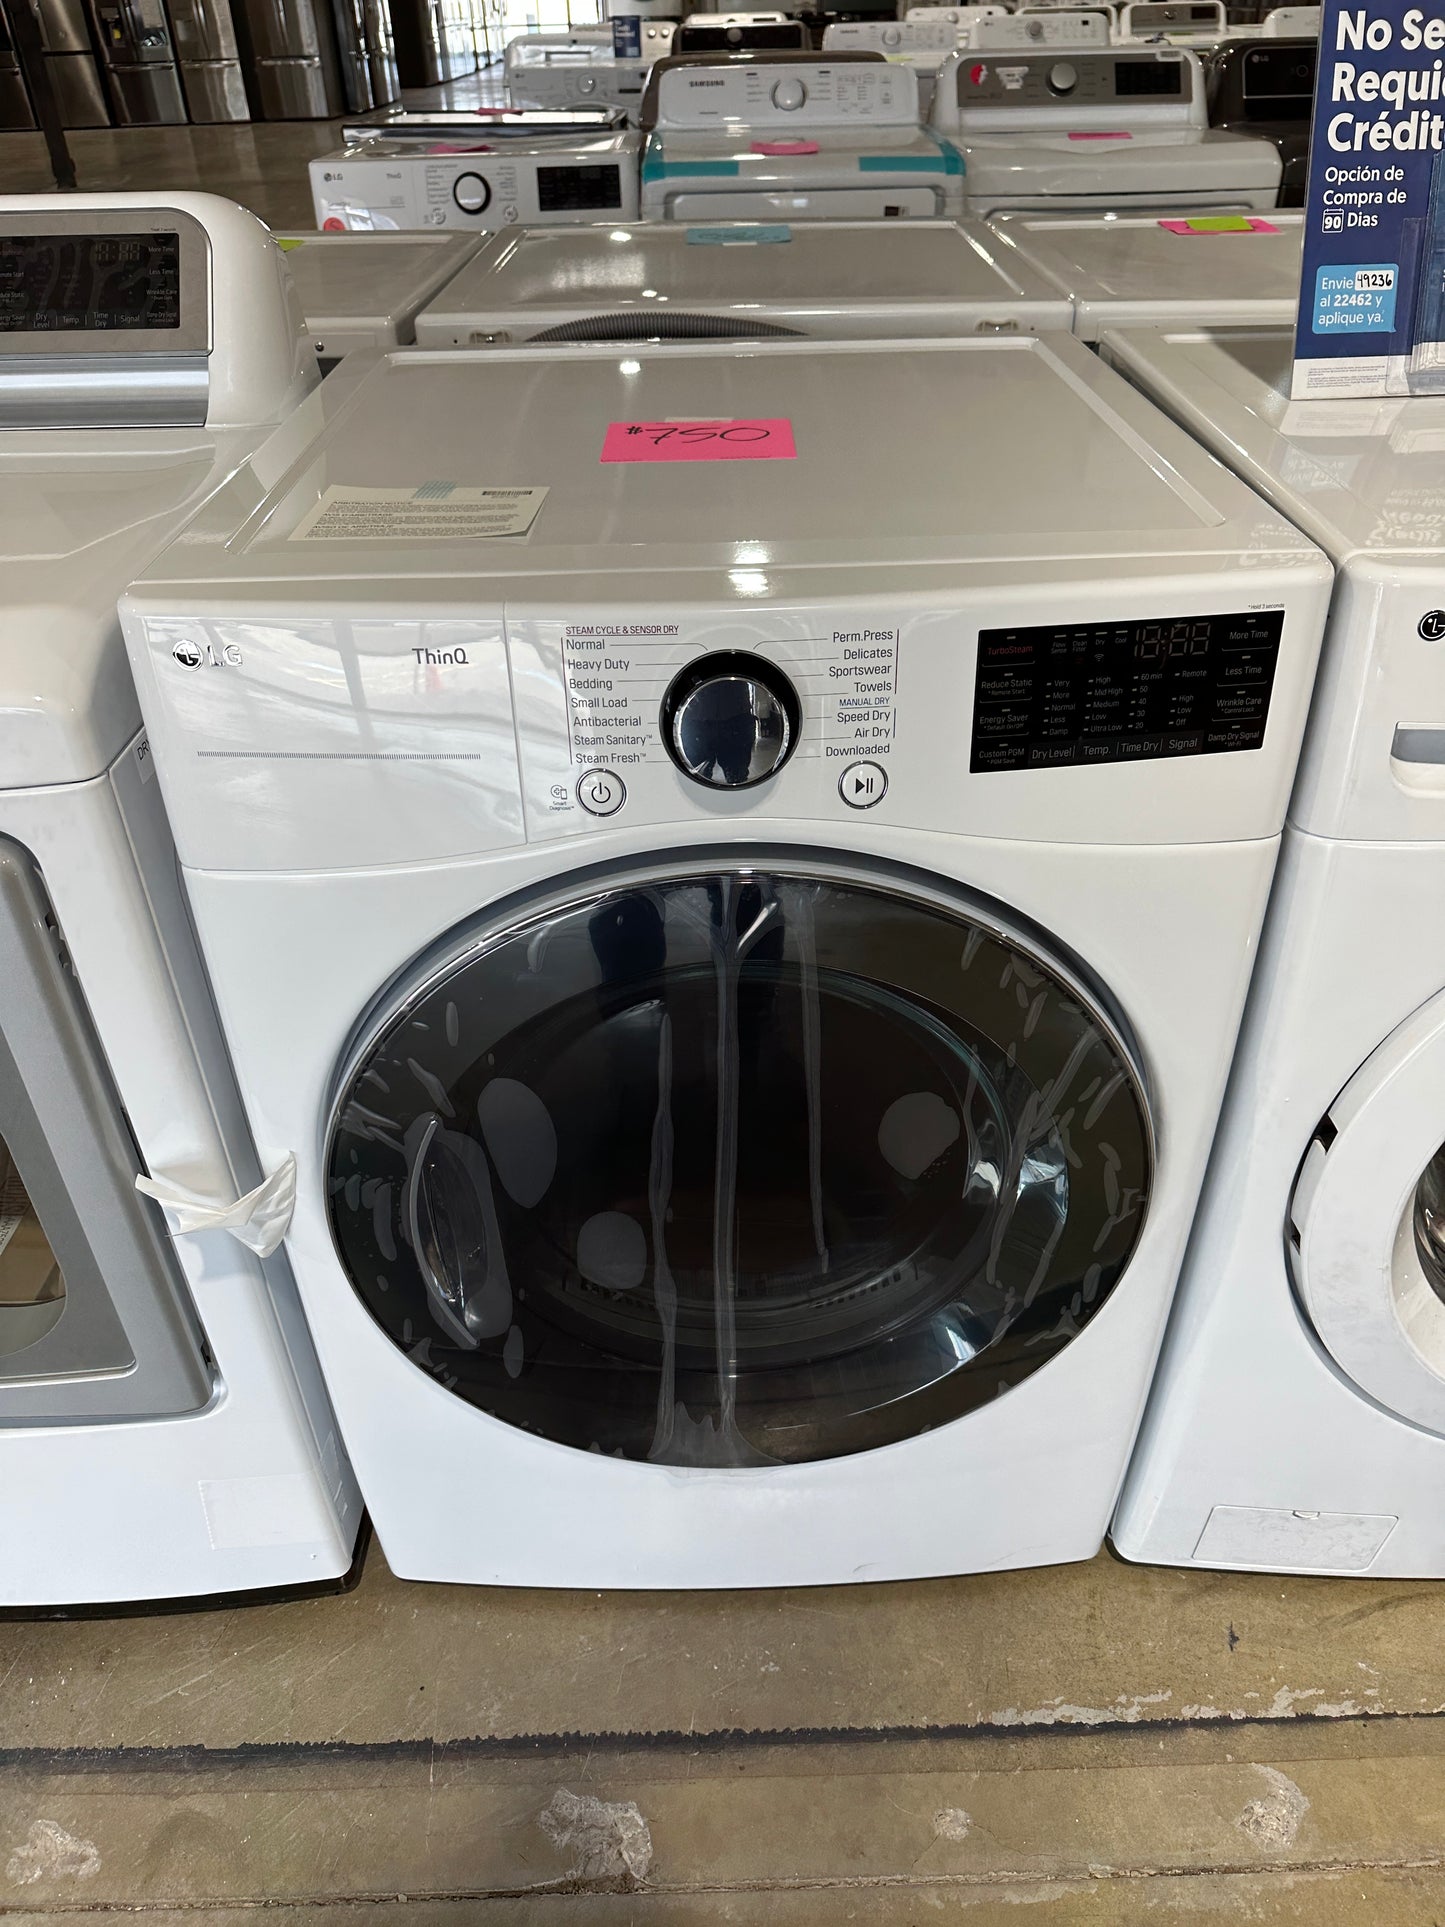 NEW-IN-BOX LG STACKABLE ELECTRIC DRYER - DRY11699S DLEX3900W